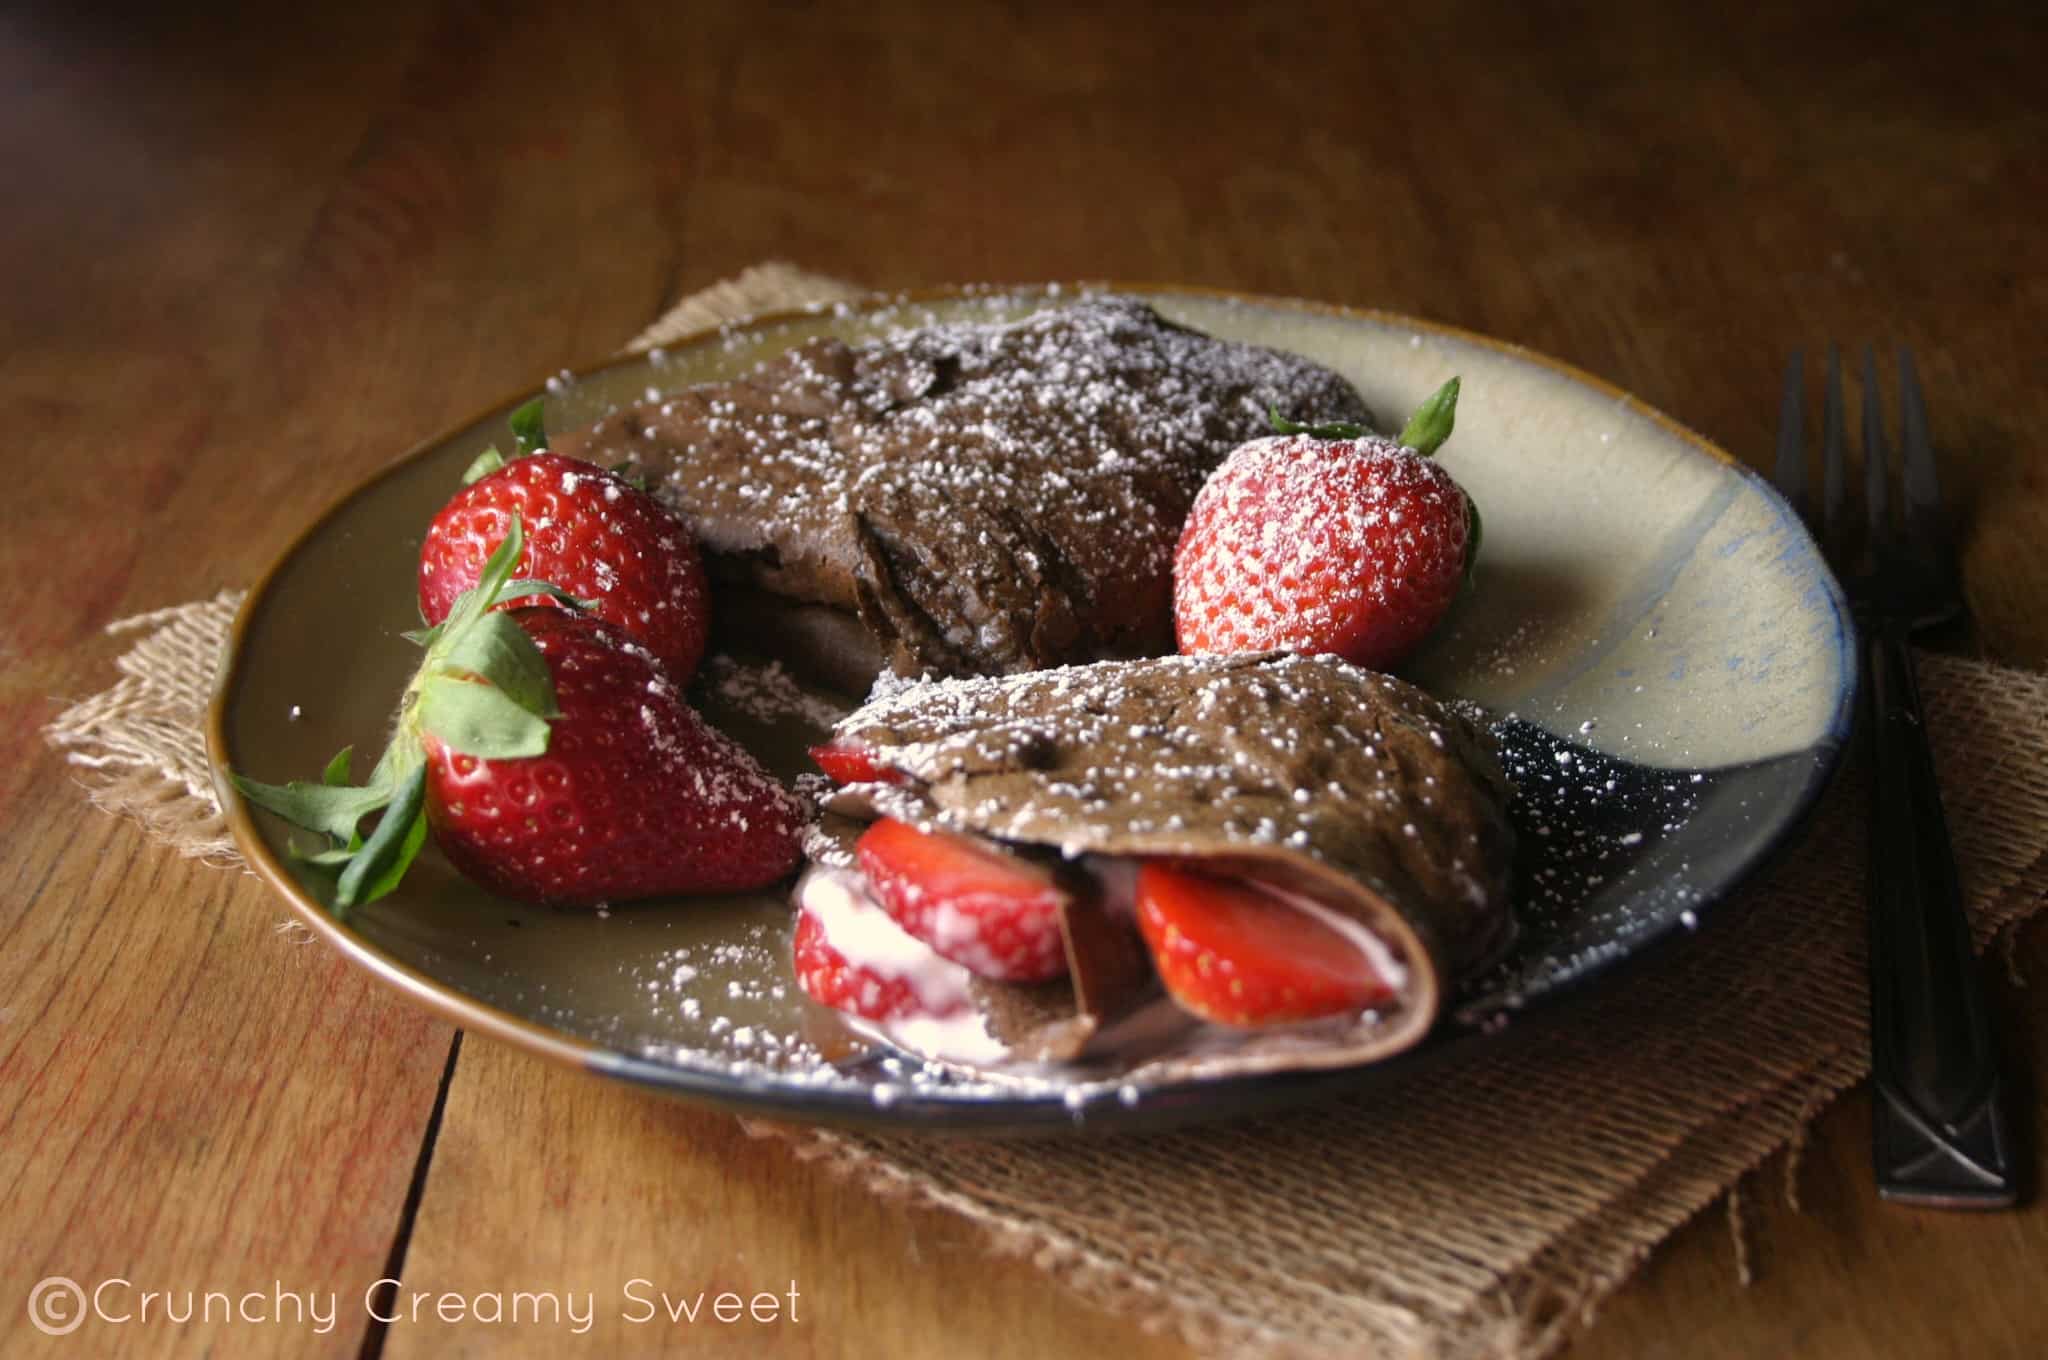 Chocolate Crepes with Strawberries and Cream Cheese - elegant breakfast or brunch idea that's quite easy to make. Delicious chocolate crepes filled with cream cheese and strawberries.